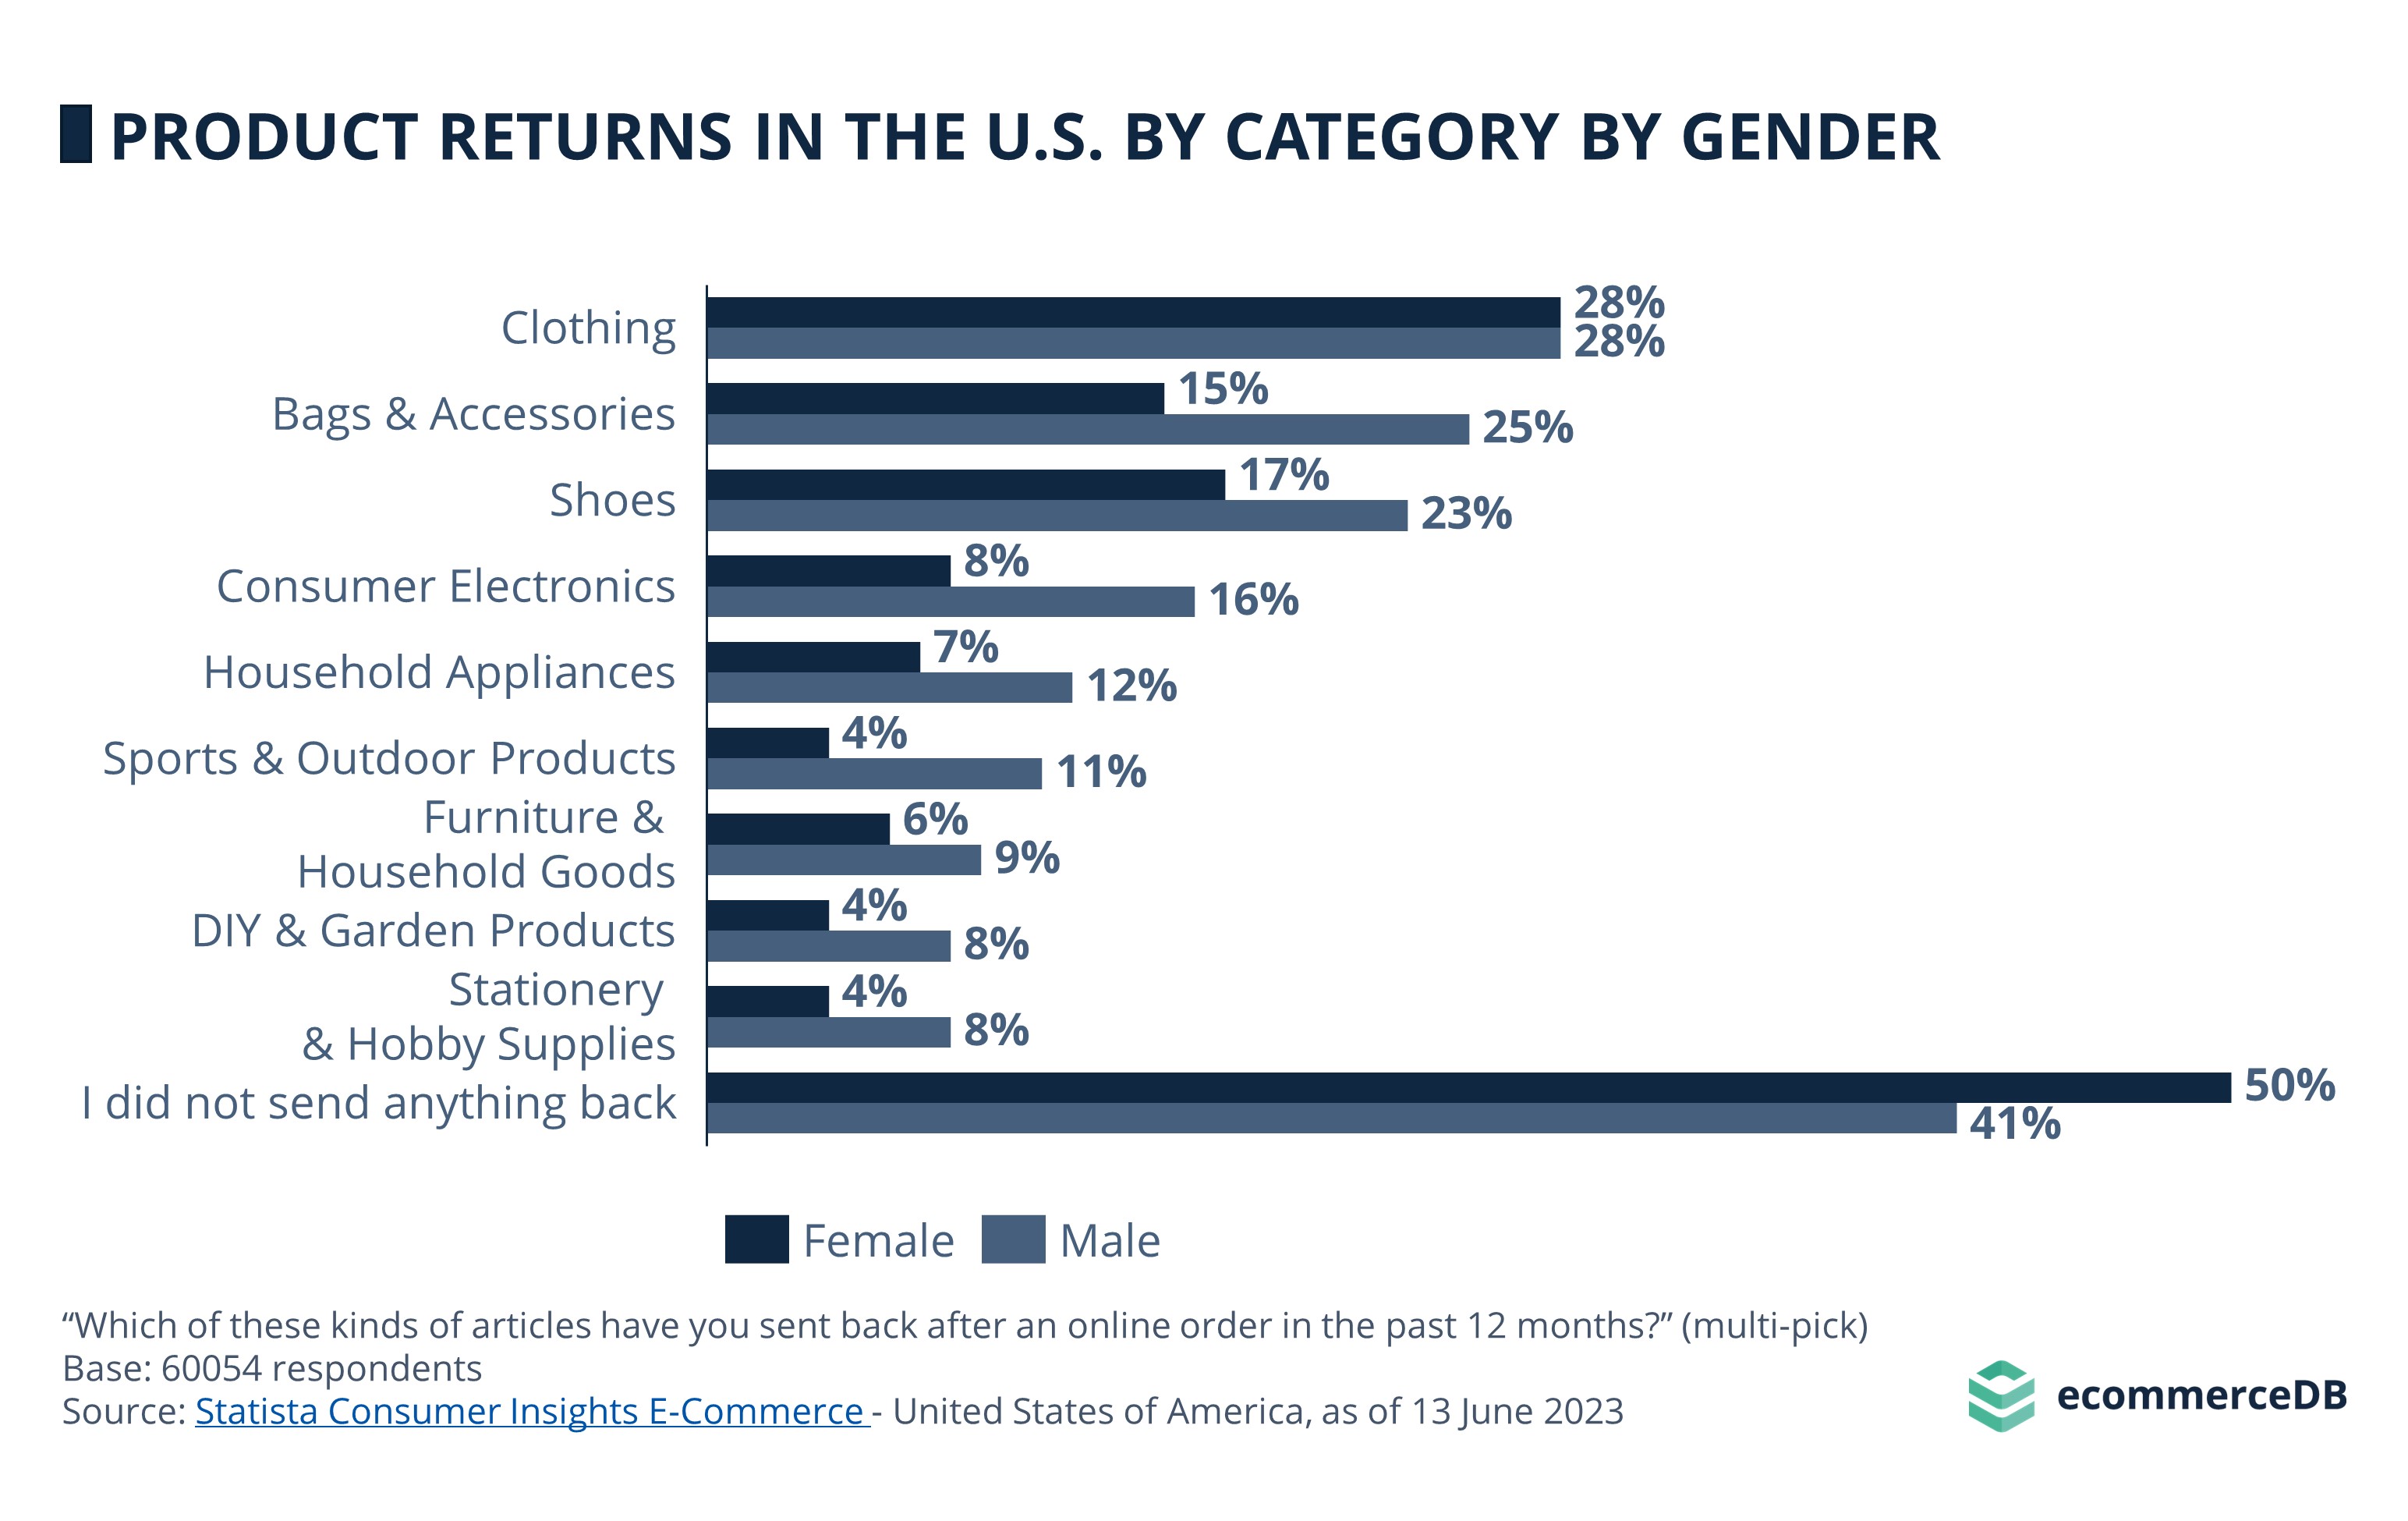 Product return rates in the U.S. according to Gender